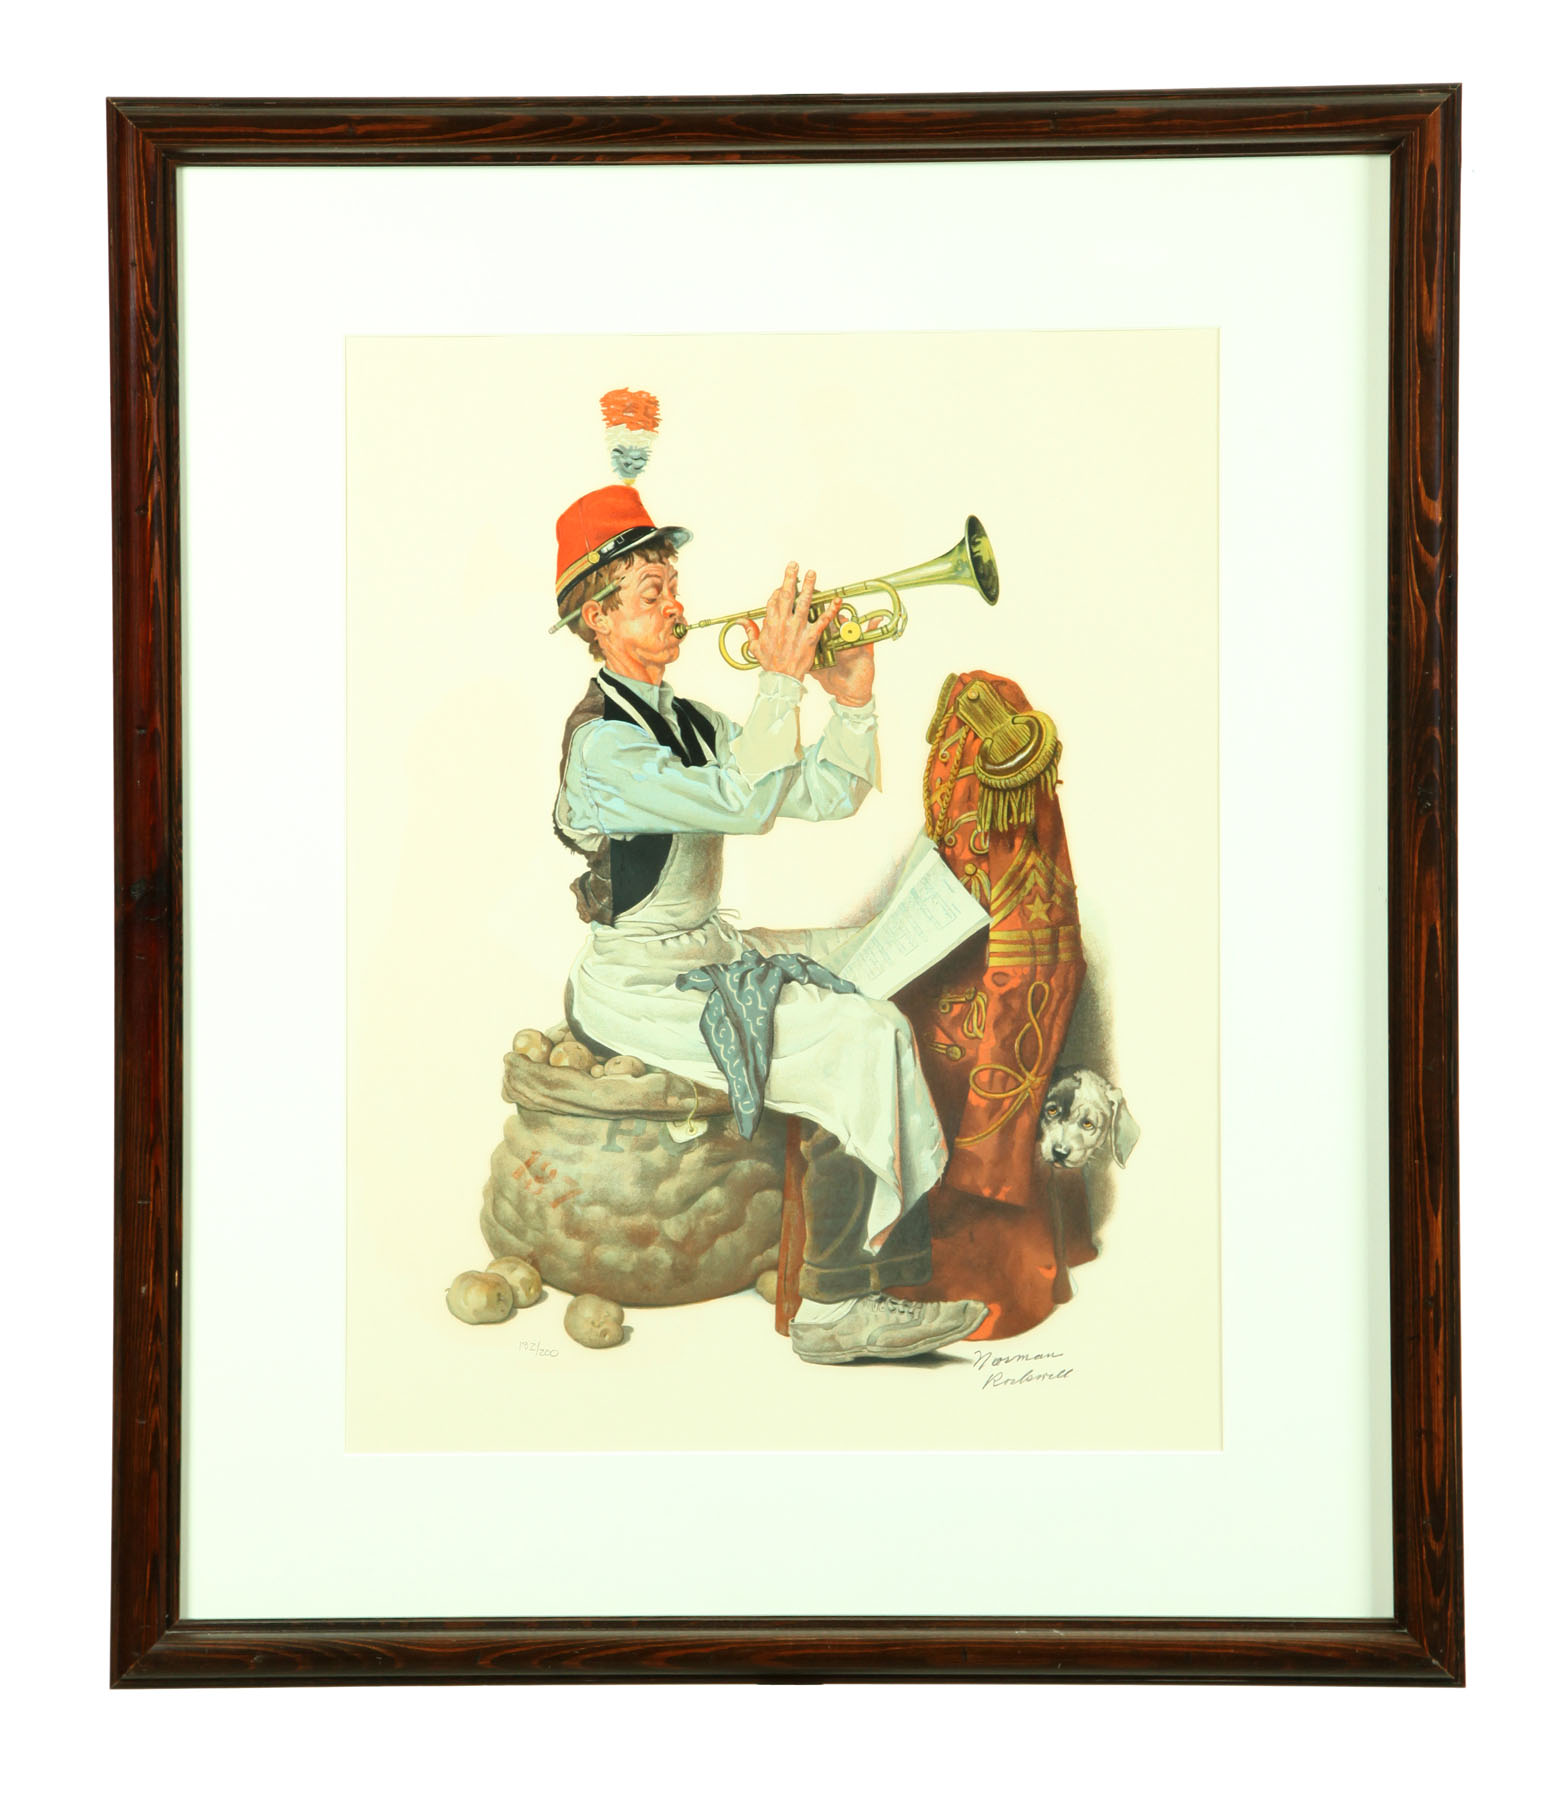 THE TRUMPETER PRINT BY NORMAN ROCKWELL